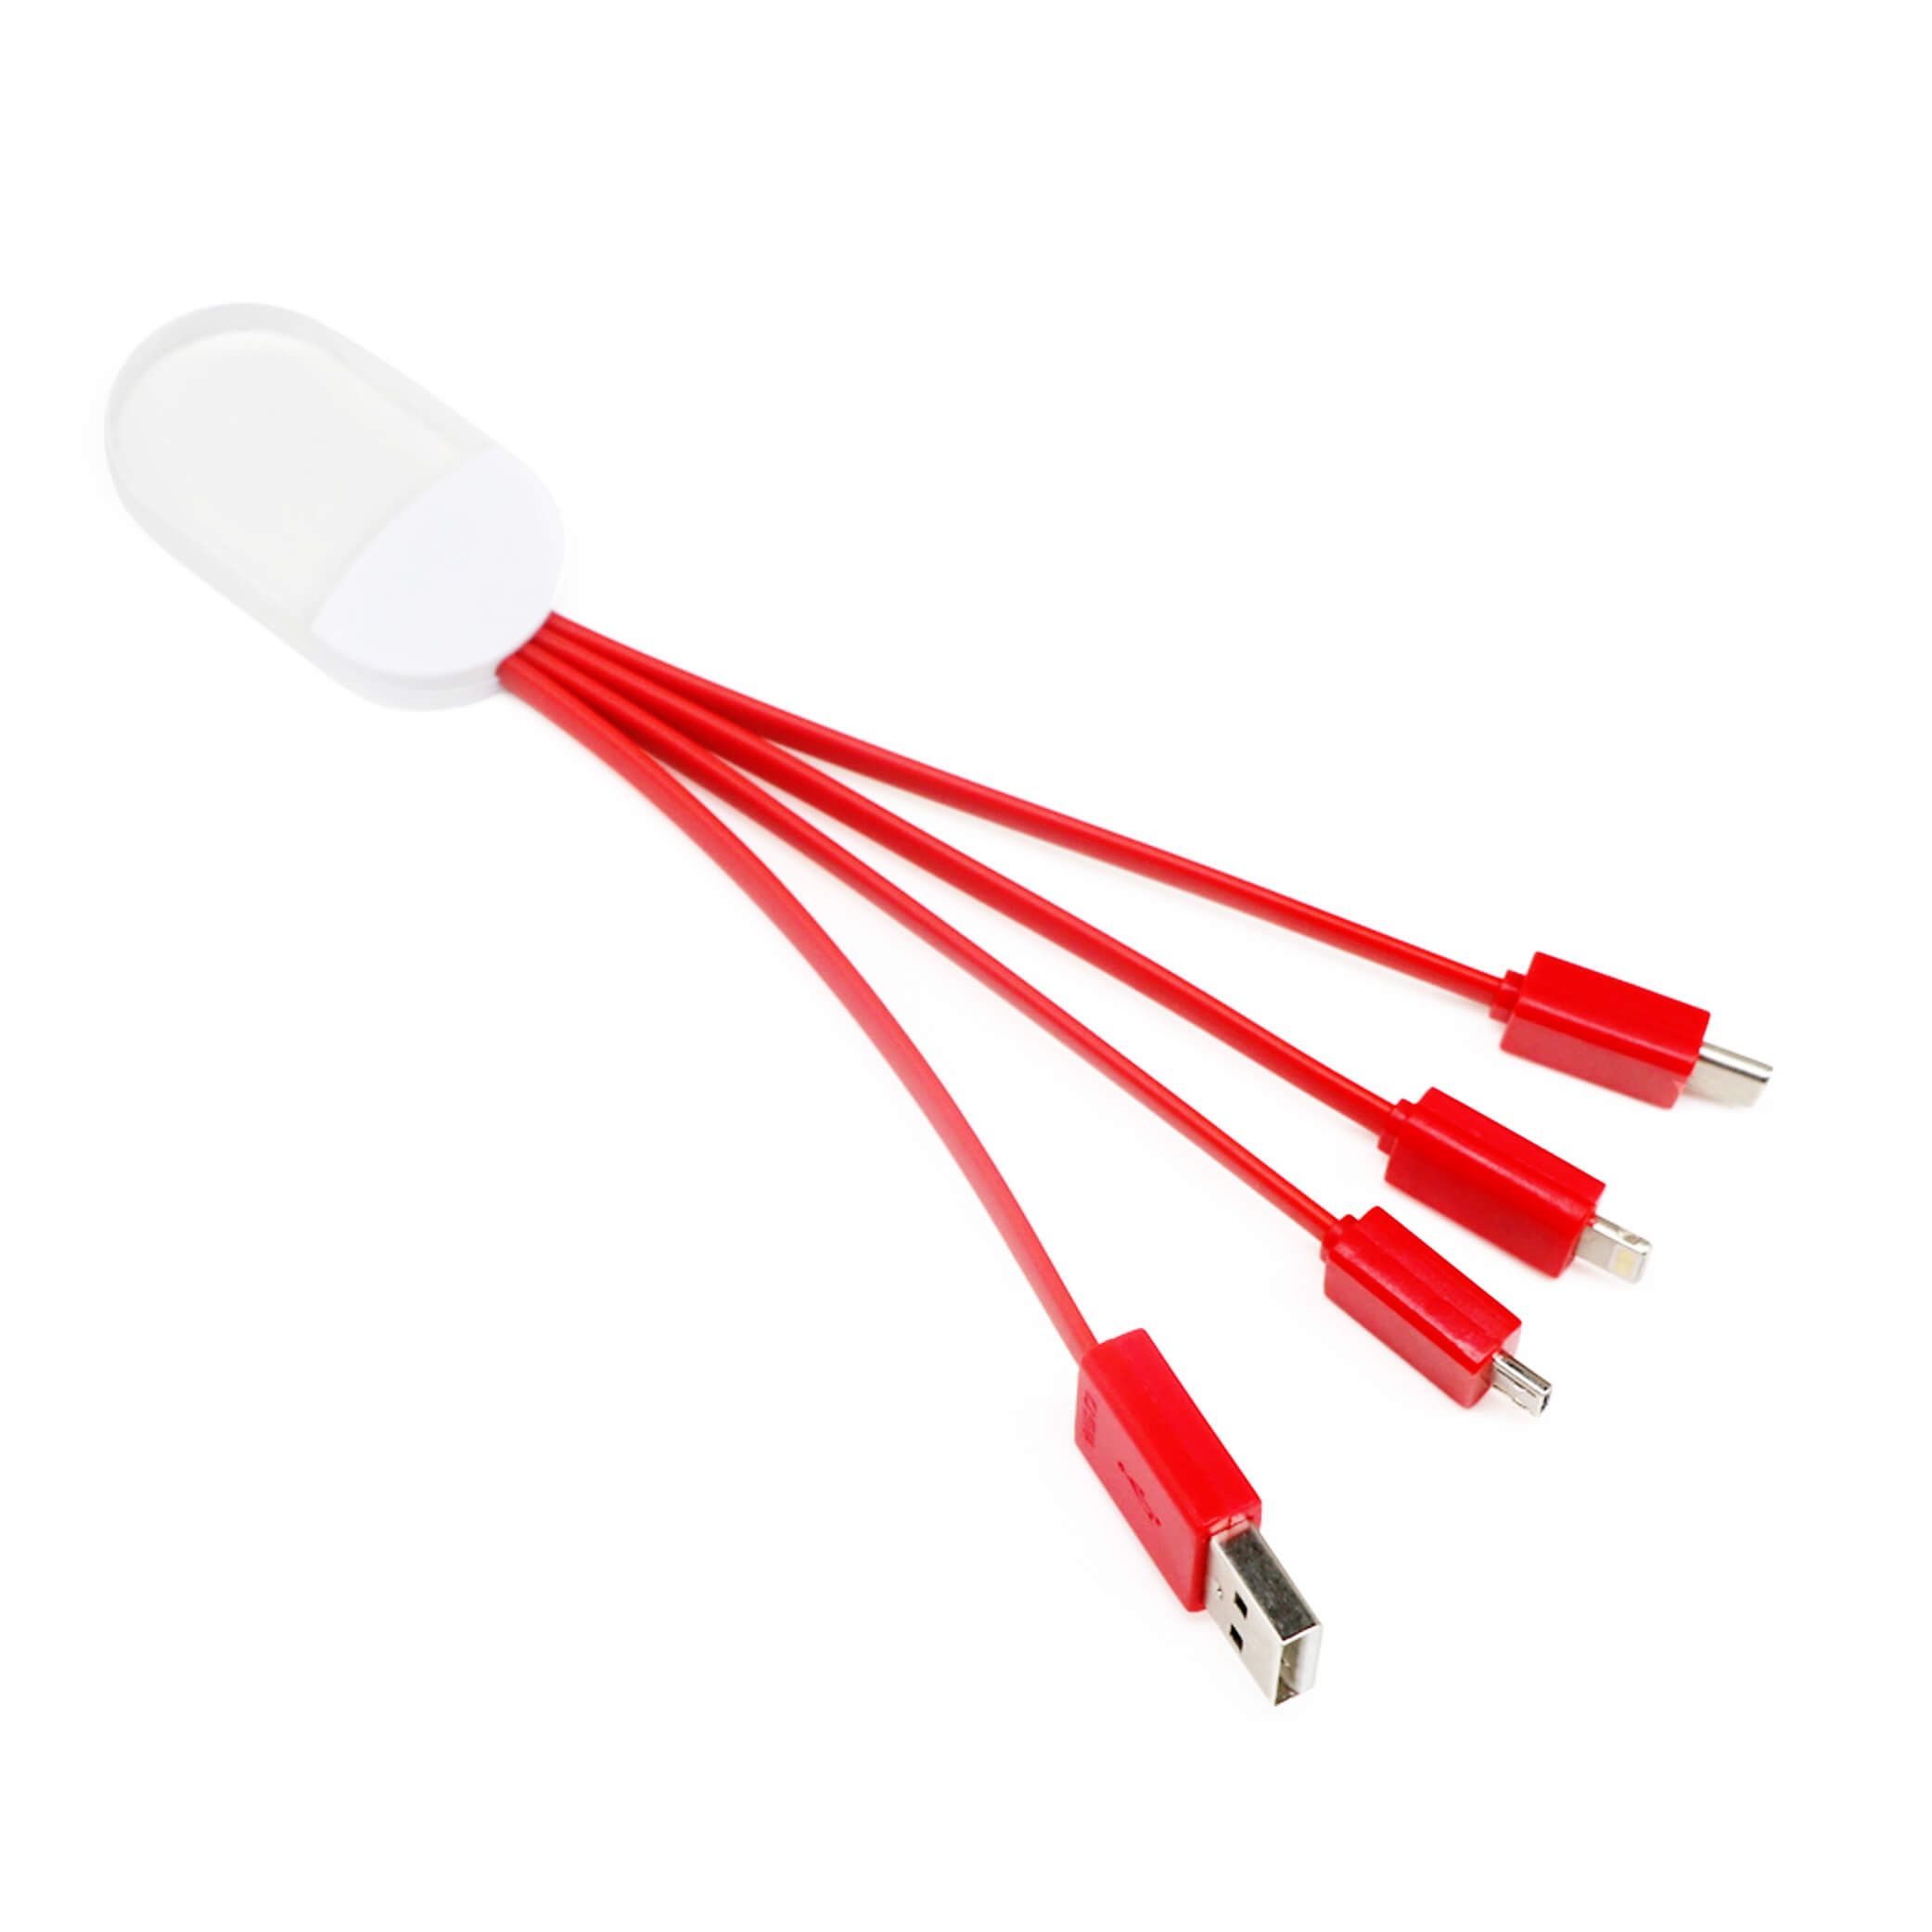 Promotional LED Crystal Light-up Logo 4 in 1 Charging Cable